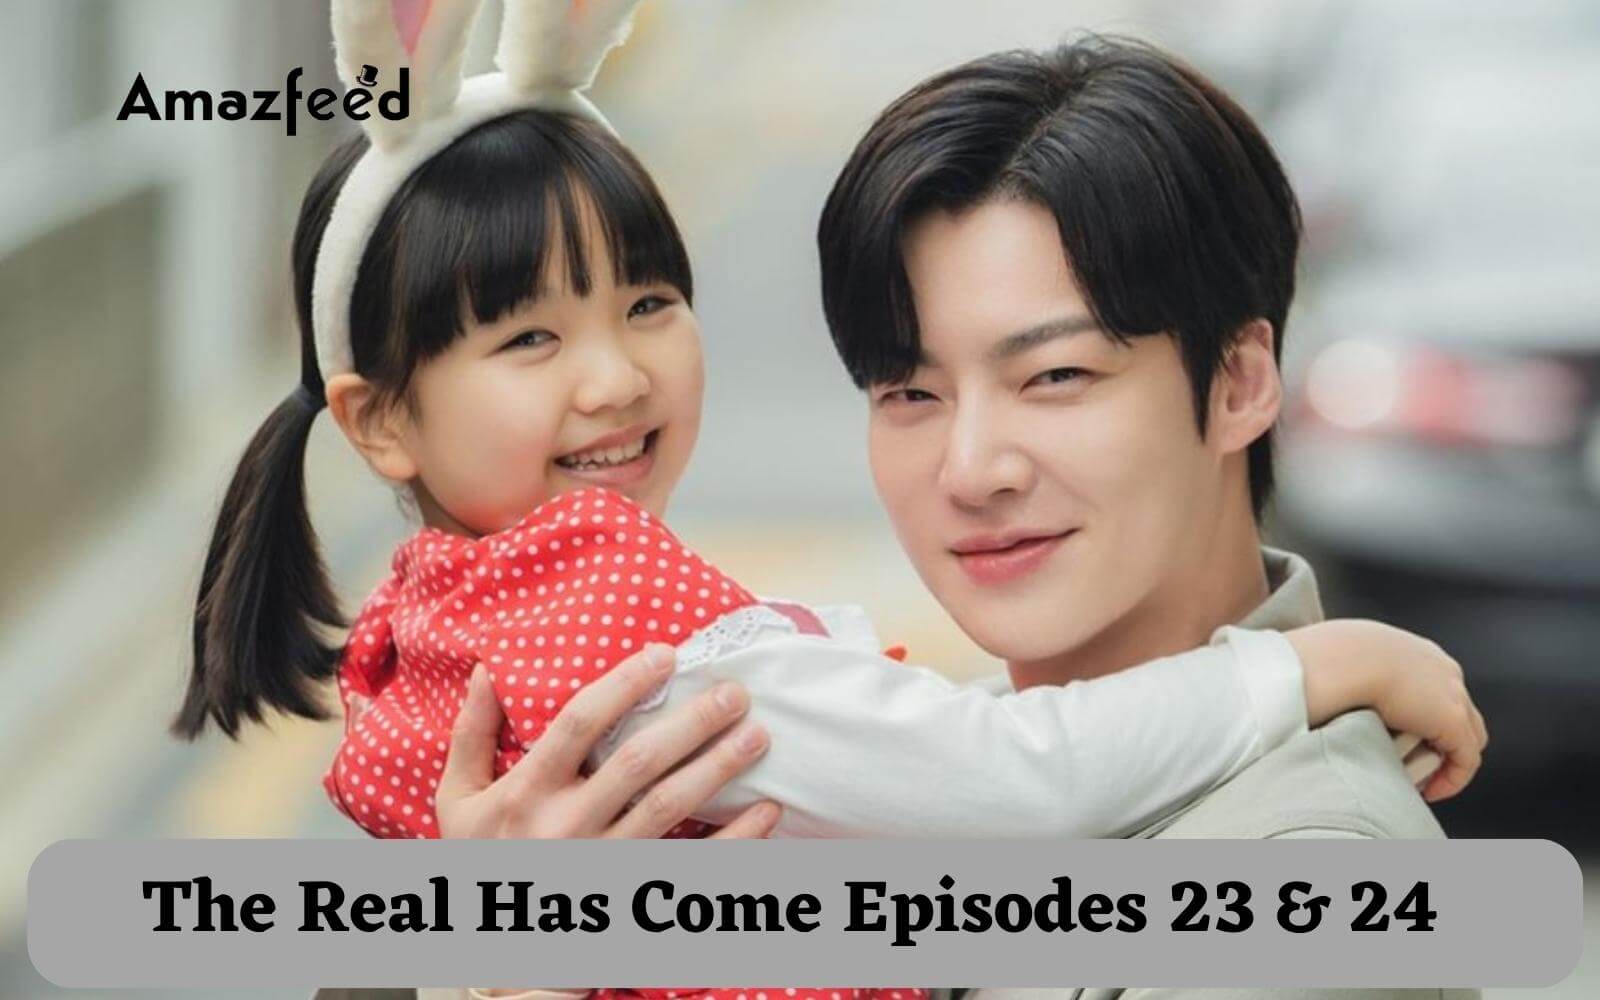 The Real Has Come Episodes 23 & 24 Release Date, Plotline, Cast